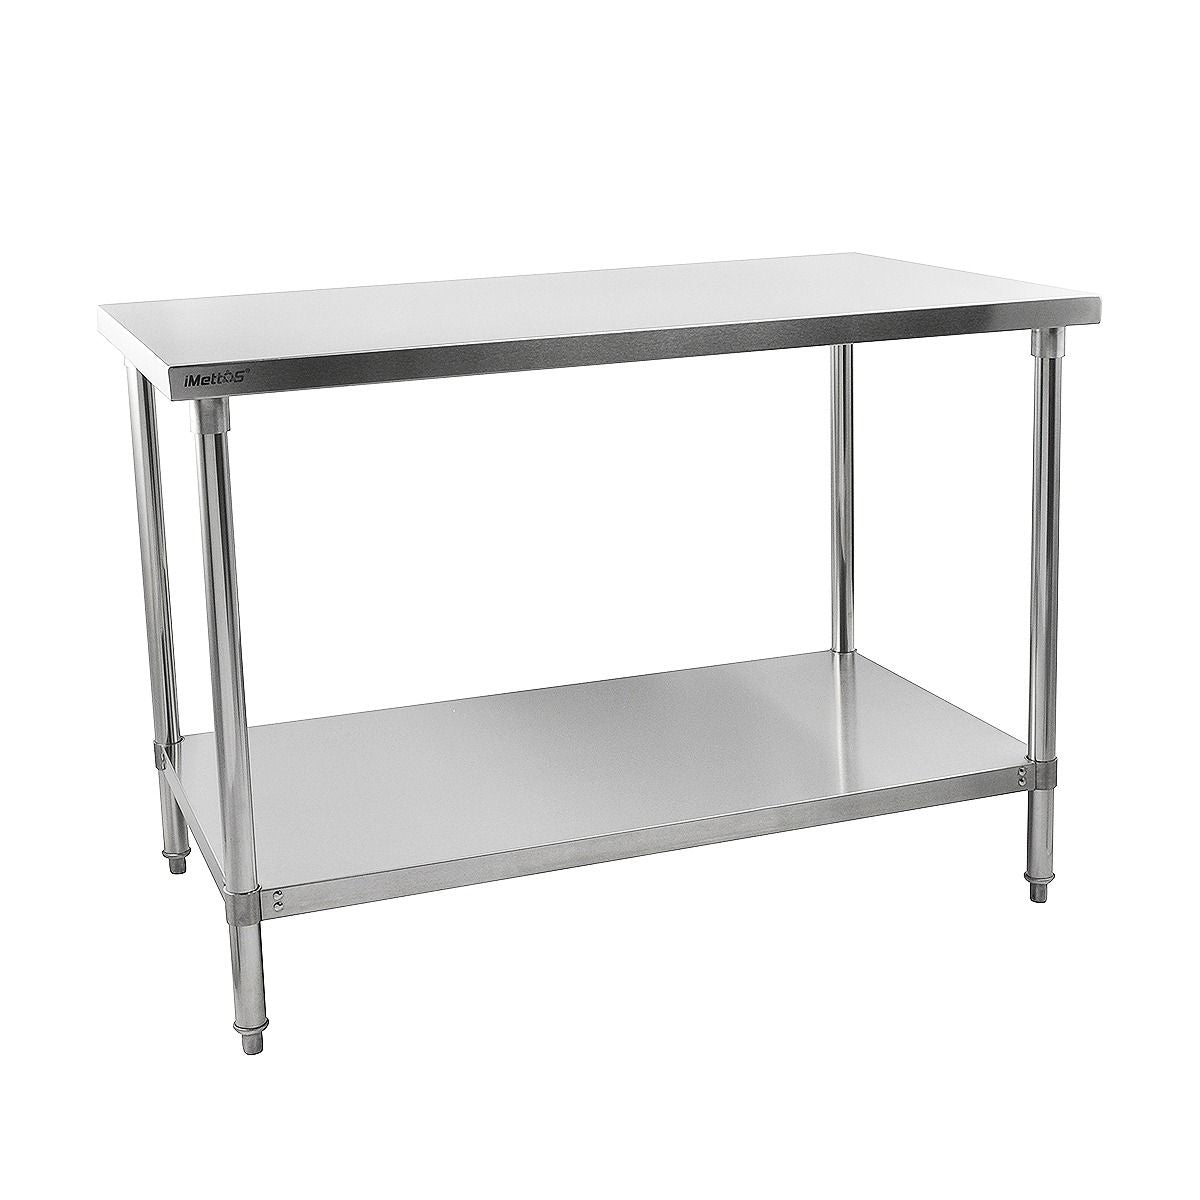 iMettos Stainless Steel Prep Table Width 1800mm - 141005